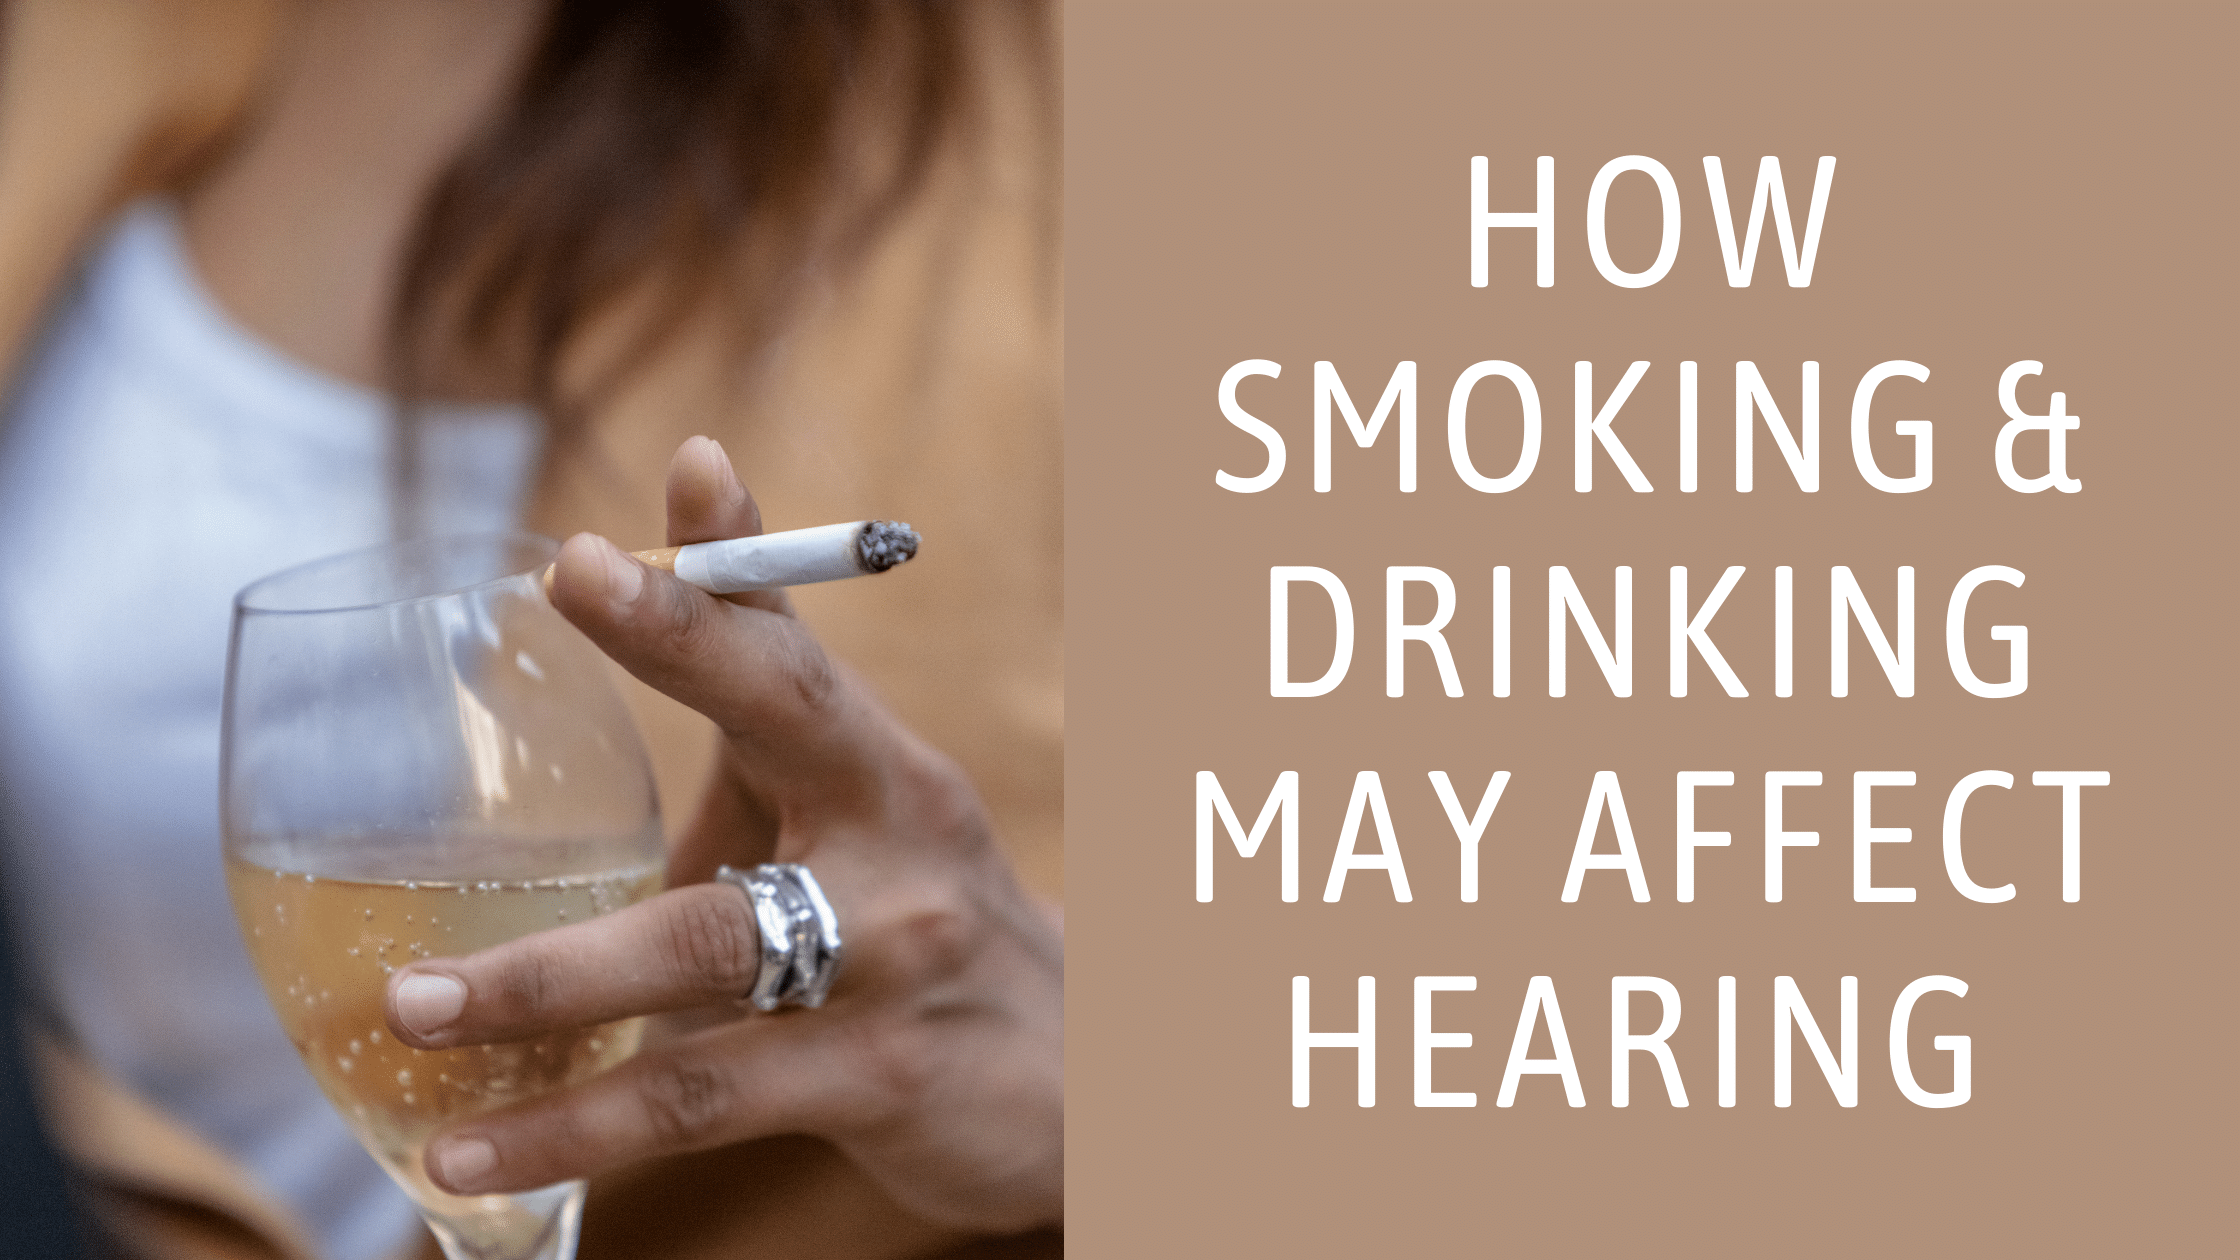 Featured image for “How Smoking & Drinking May Affect Hearing”